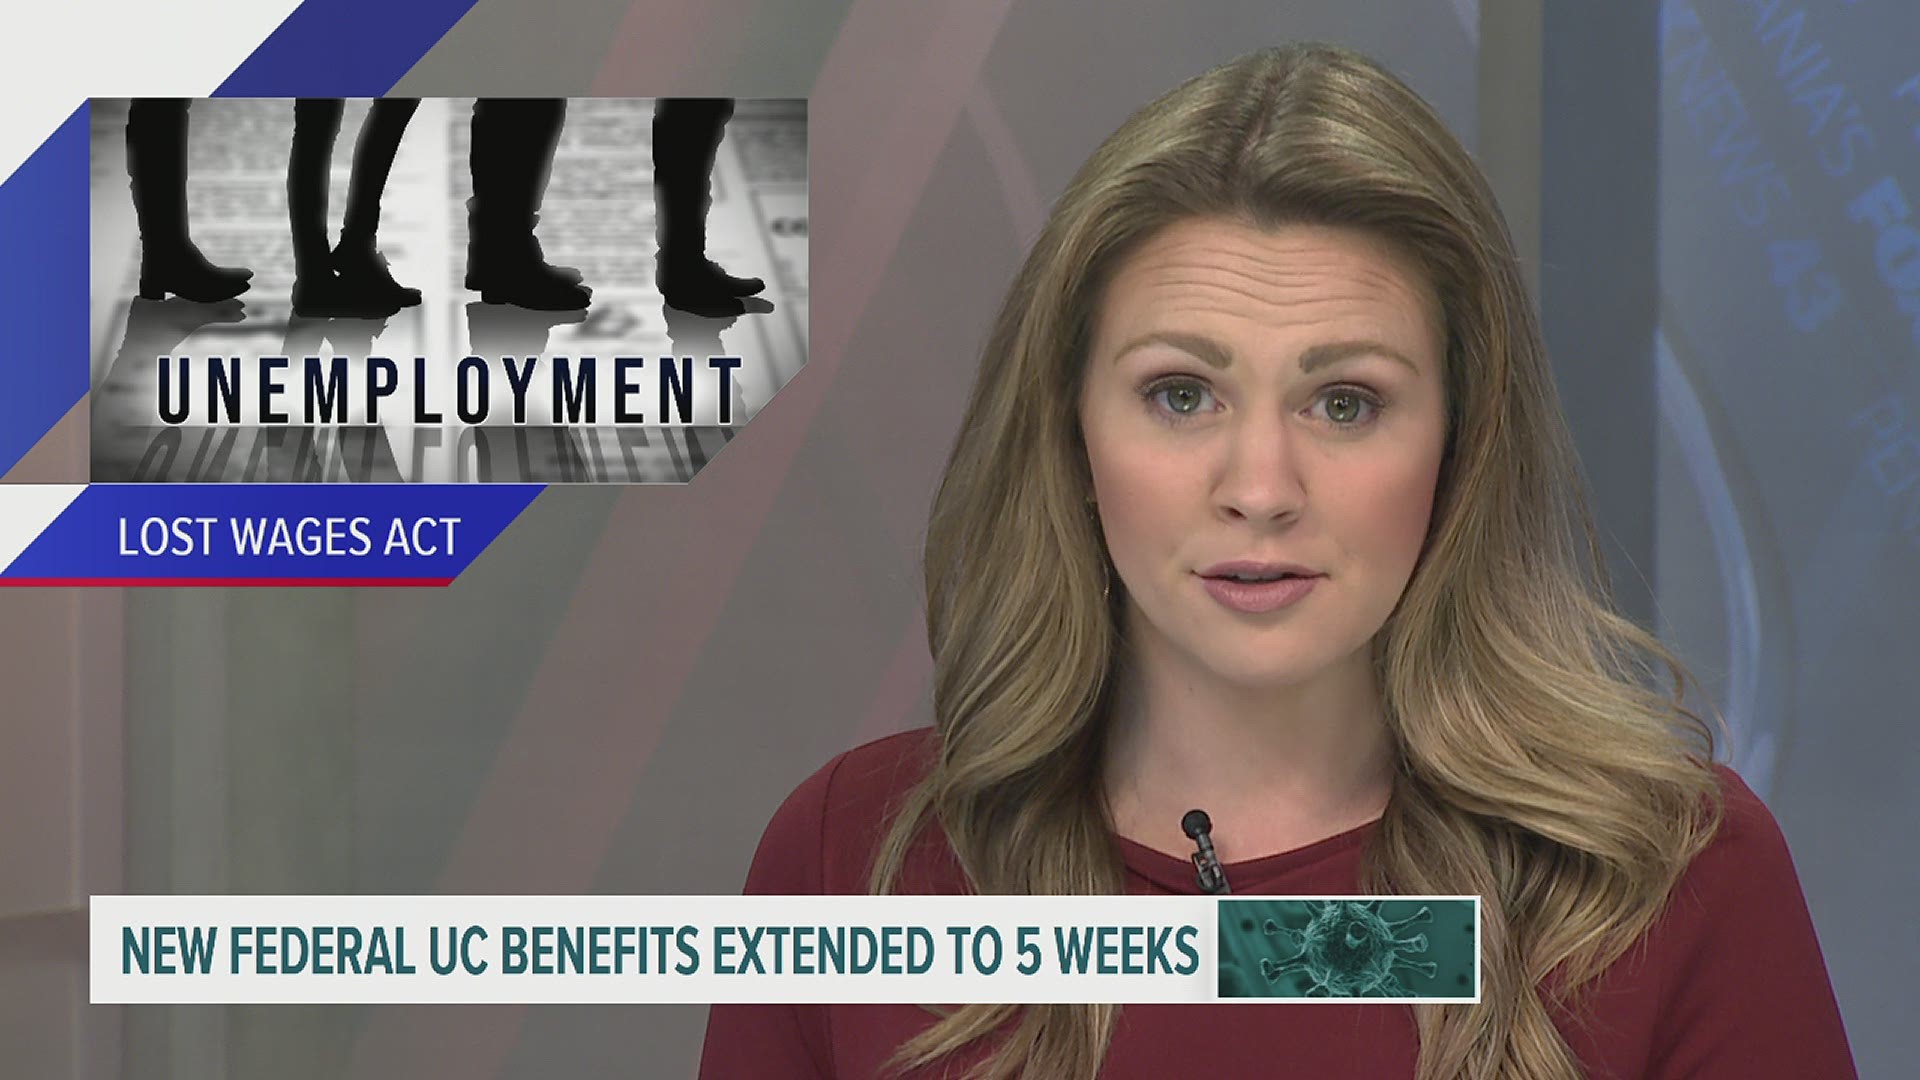 The Pennsylvania Department of Labor and Industry says the new benefits will be available as soon as Monday (9/14) and will be available for an additional two weeks.